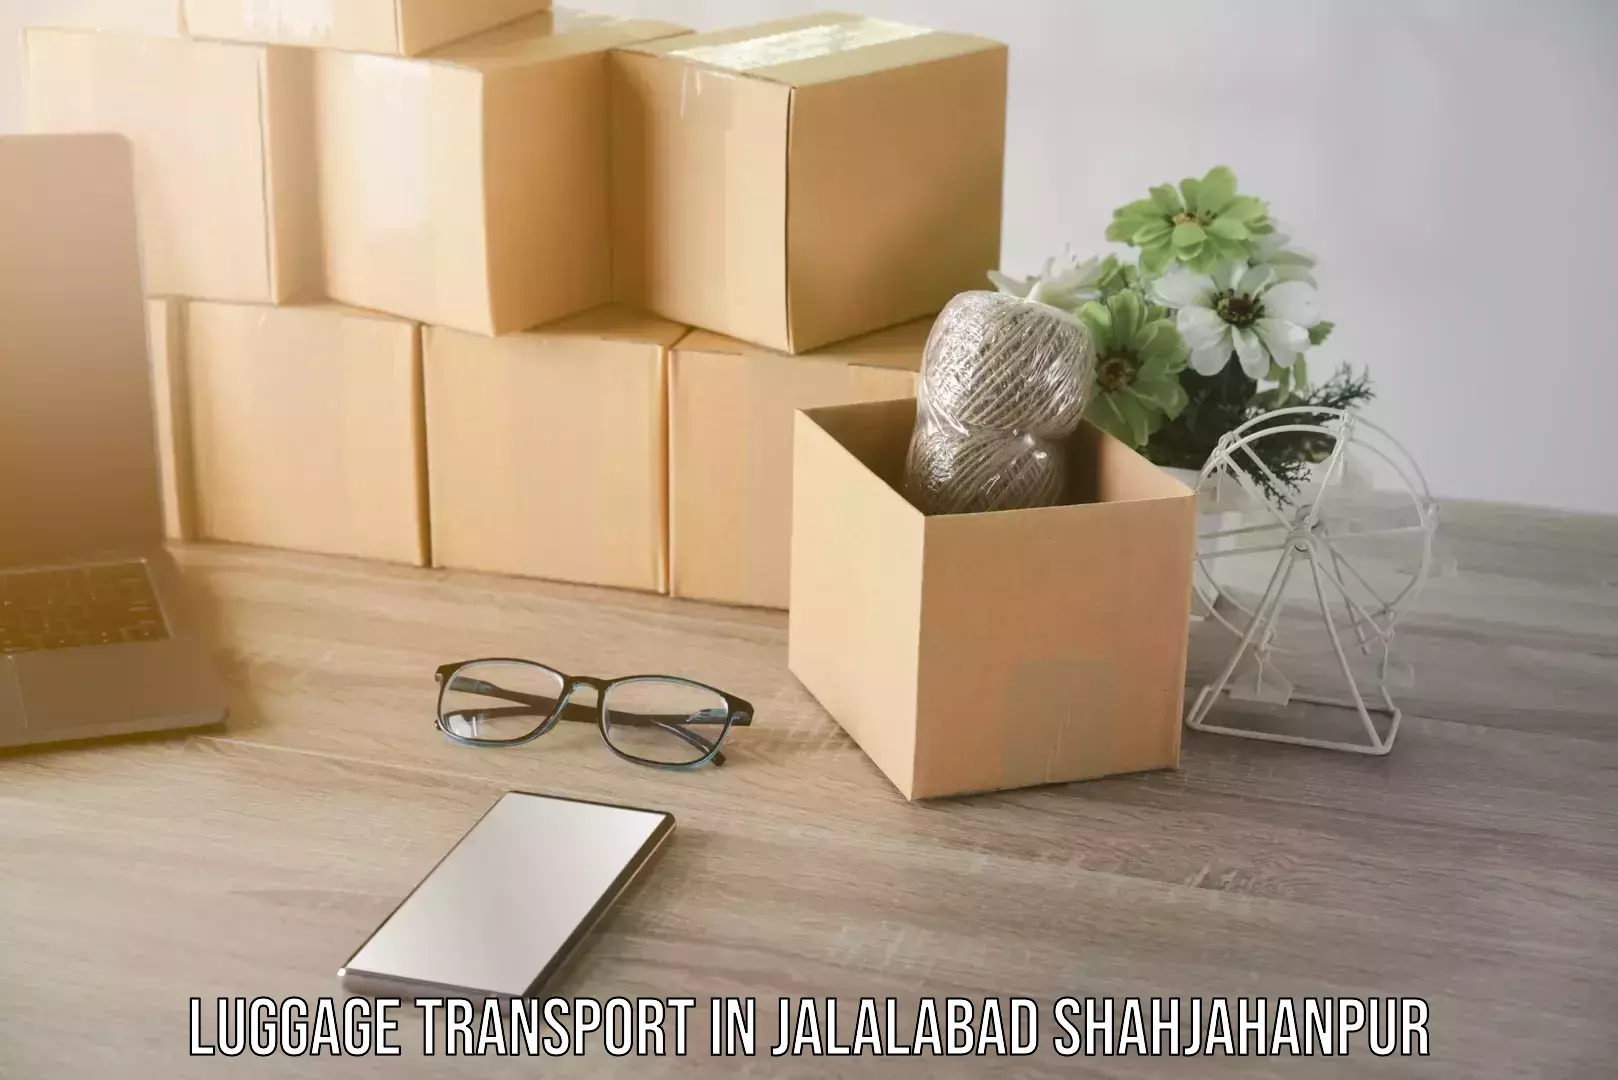 Online luggage shipping in Jalalabad Shahjahanpur